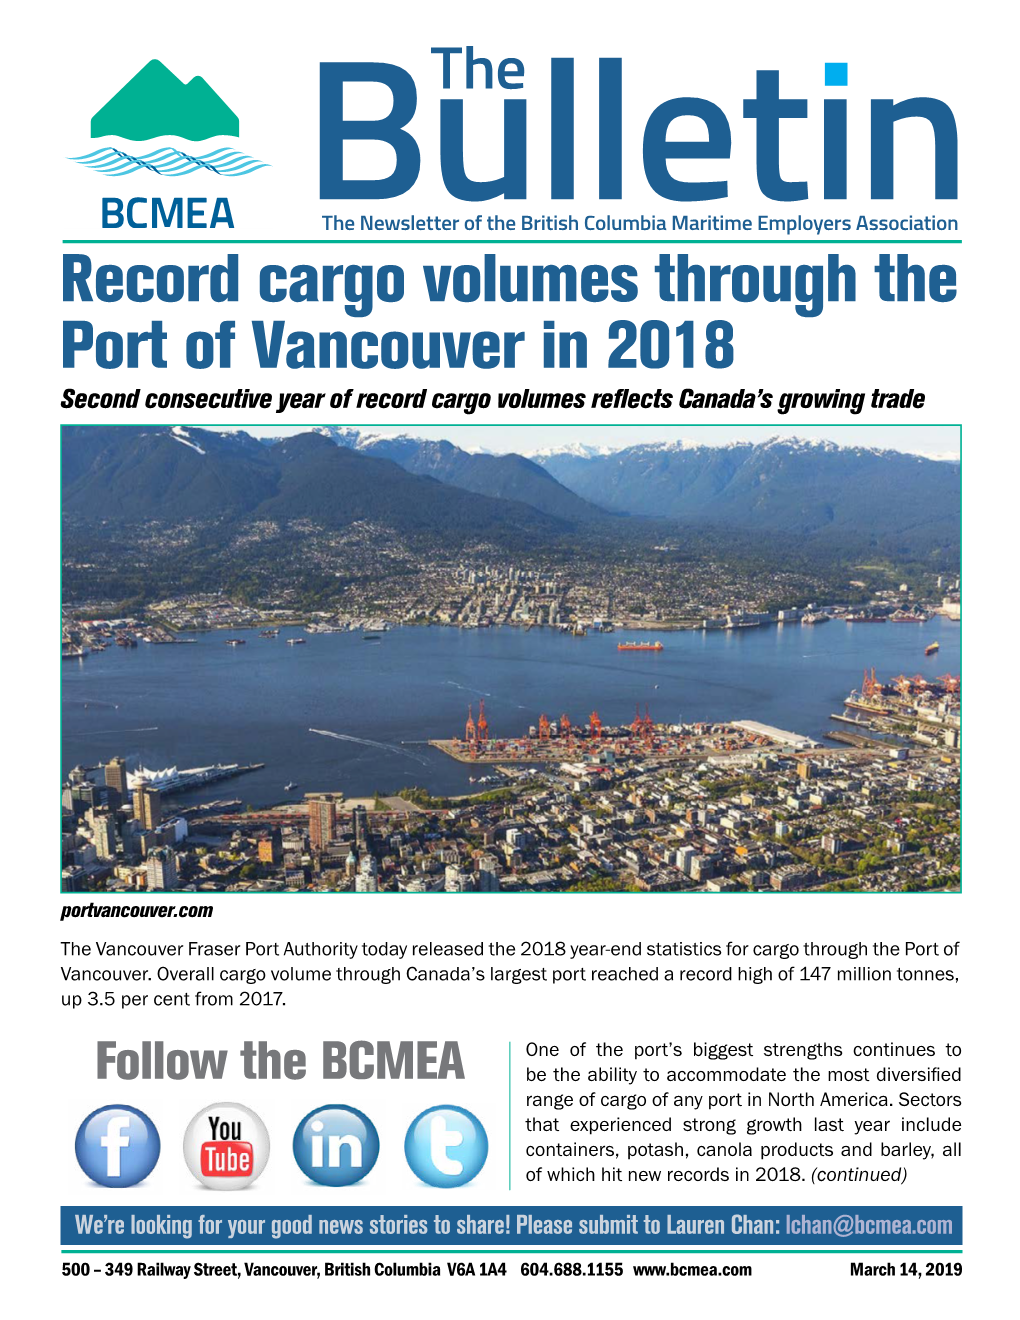 Record Cargo Volumes Through the Port of Vancouver in 2018 Second Consecutive Year of Record Cargo Volumes Reflects Canada’S Growing Trade